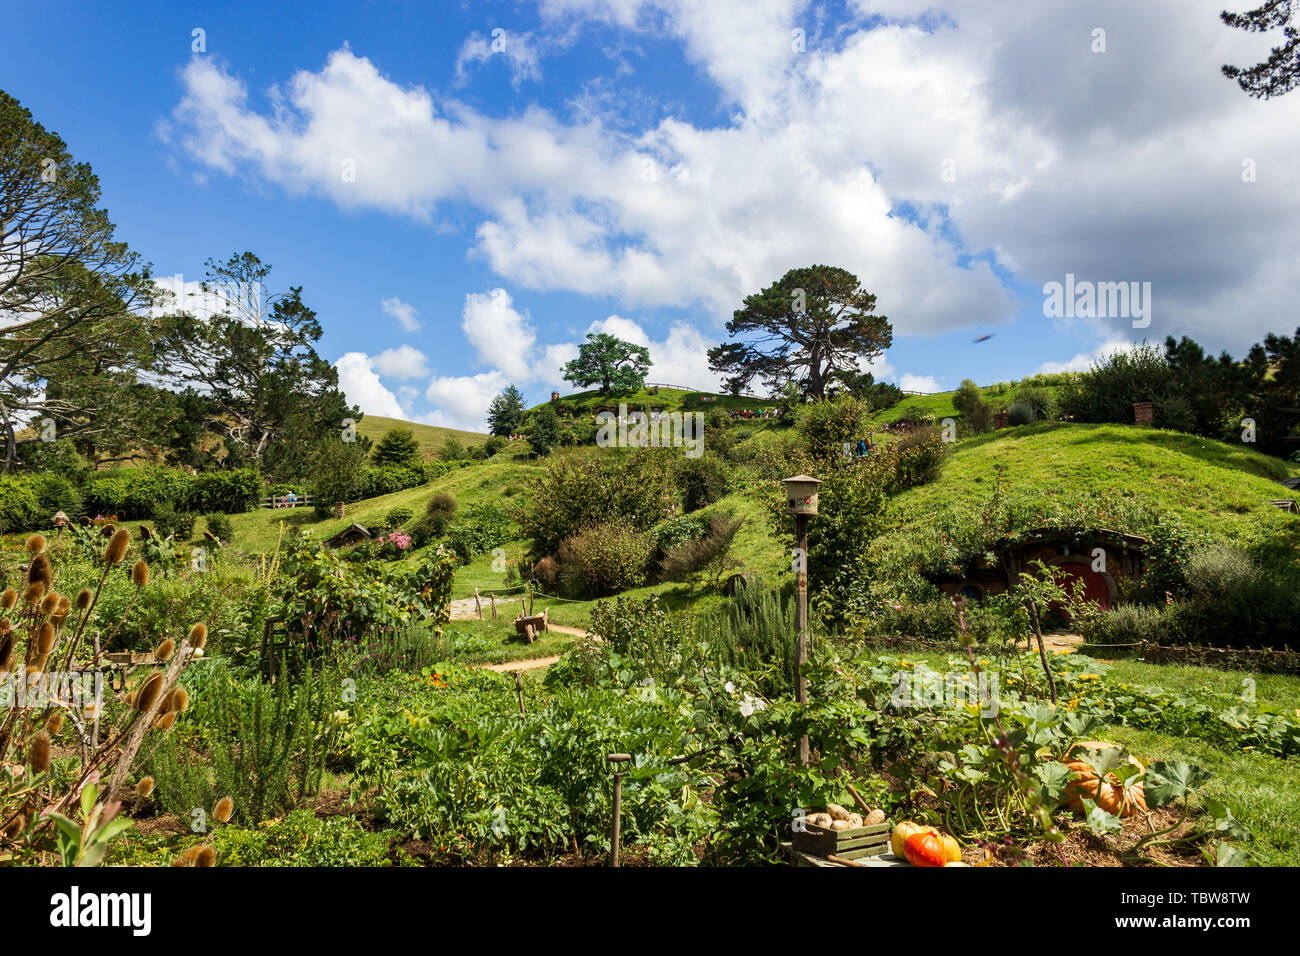 Hobbiton, Movie Set of the Lord of the Rings Movies, Auenland, New Zealand Stock Photo